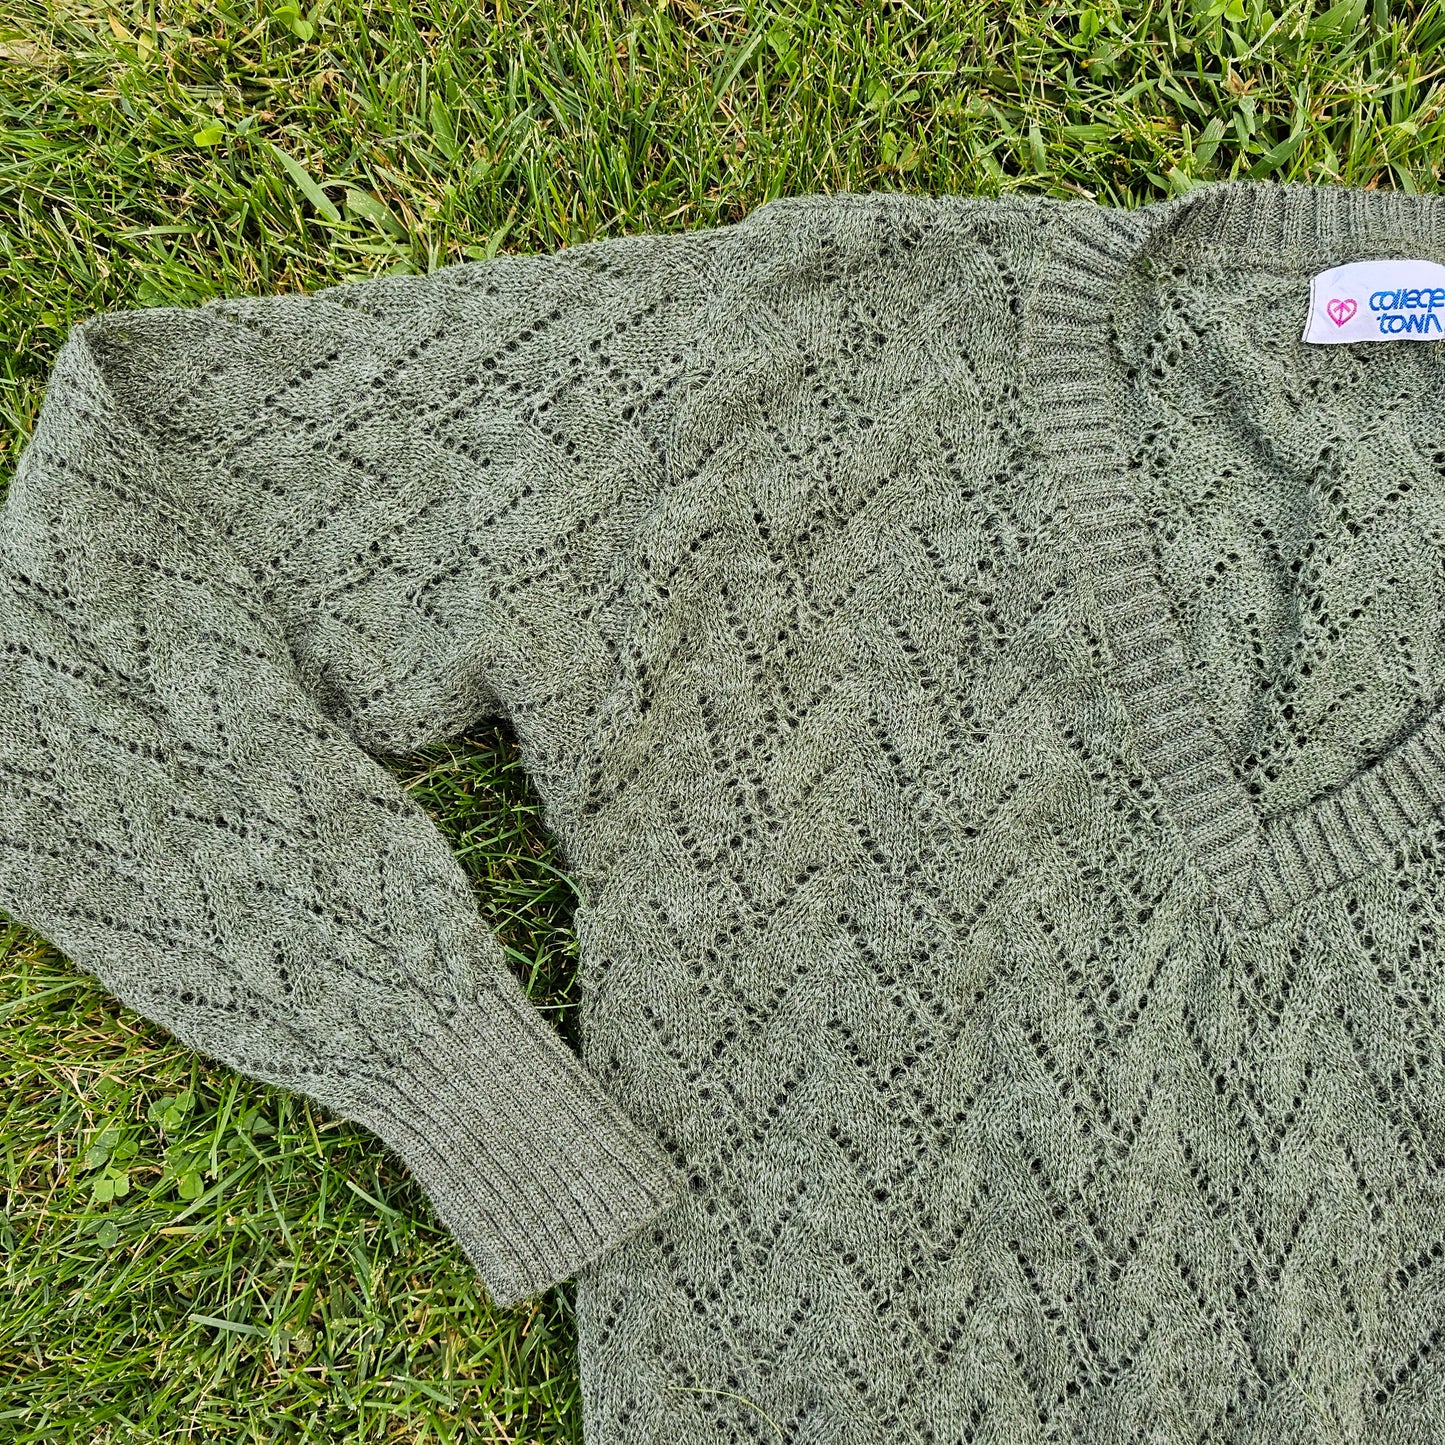 60s/70s Green Lacey Sweater